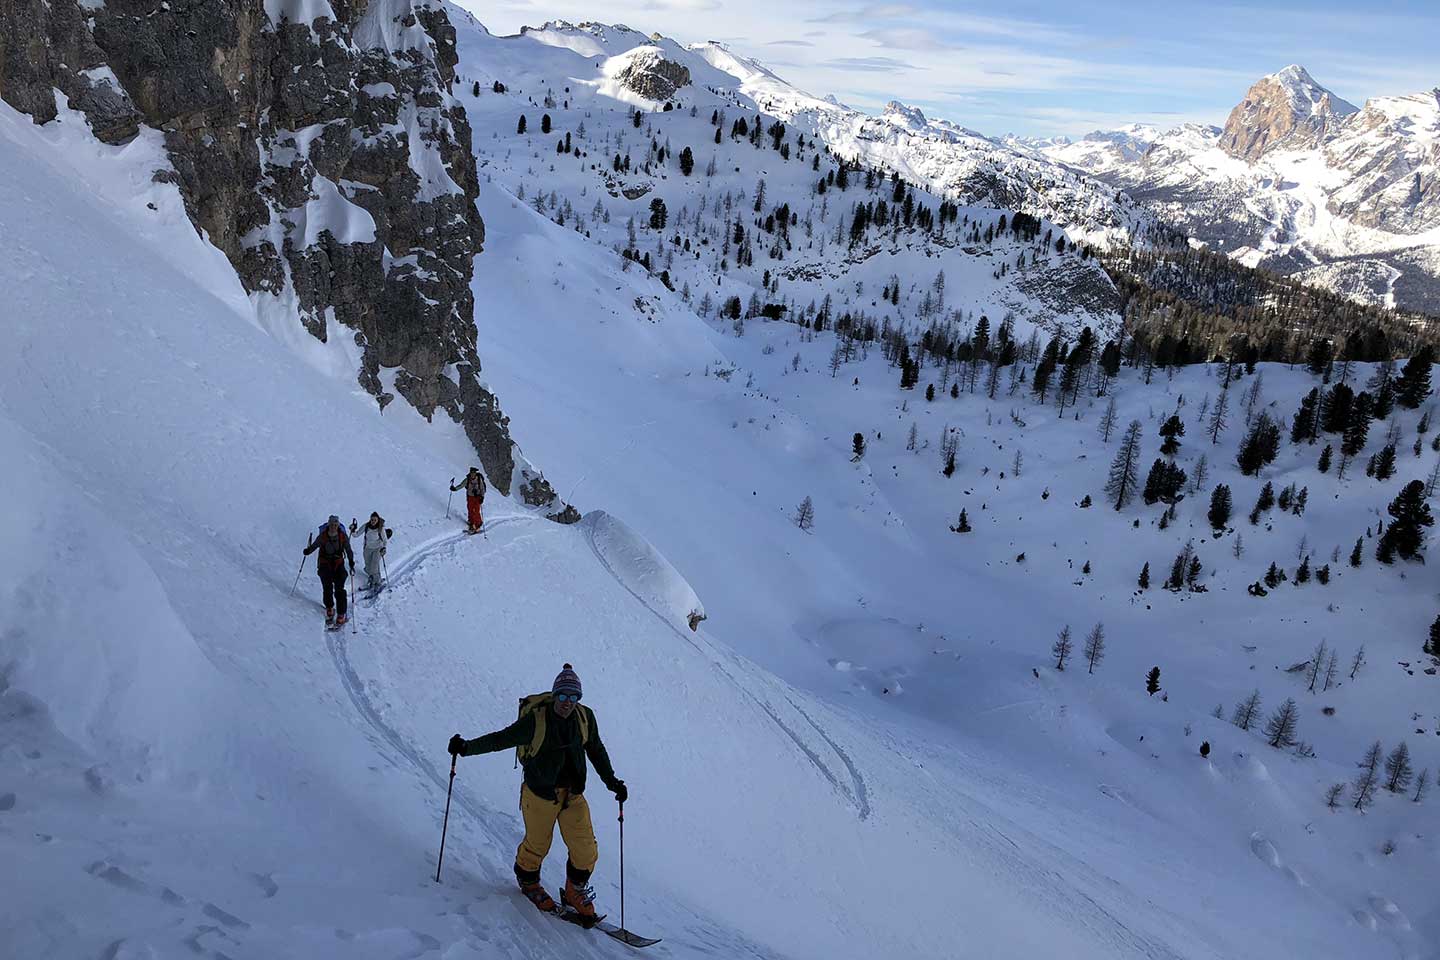 Ski Mountaineering to Forcella Marcoira in the Sorapiss Group